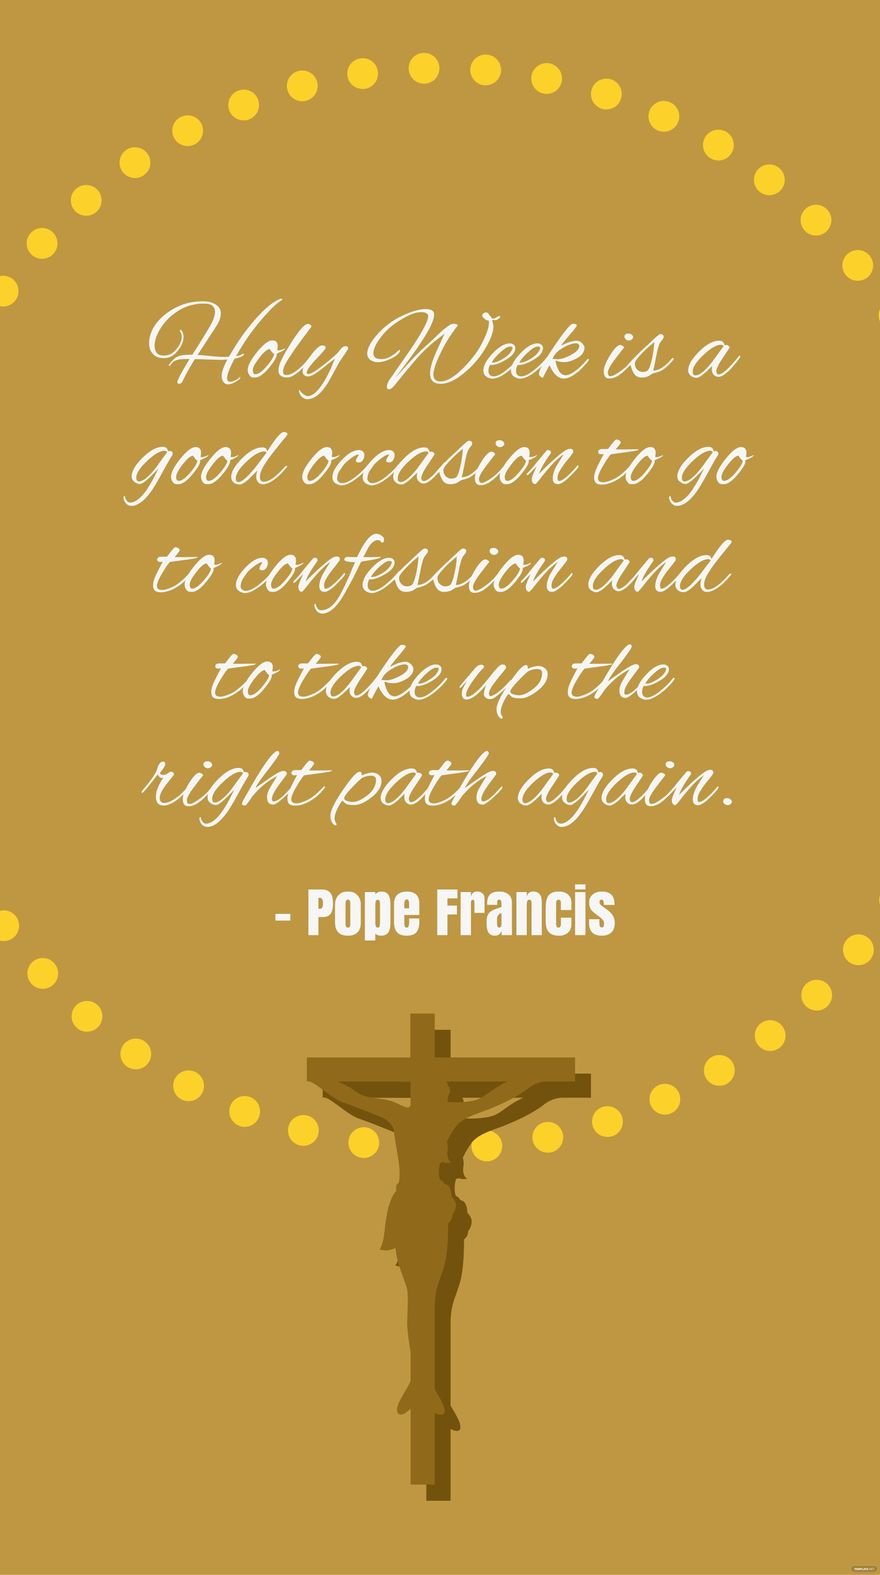 Pope Francis - Holy Week is a good occasion to go to confession and to take up the right path again. in JPG